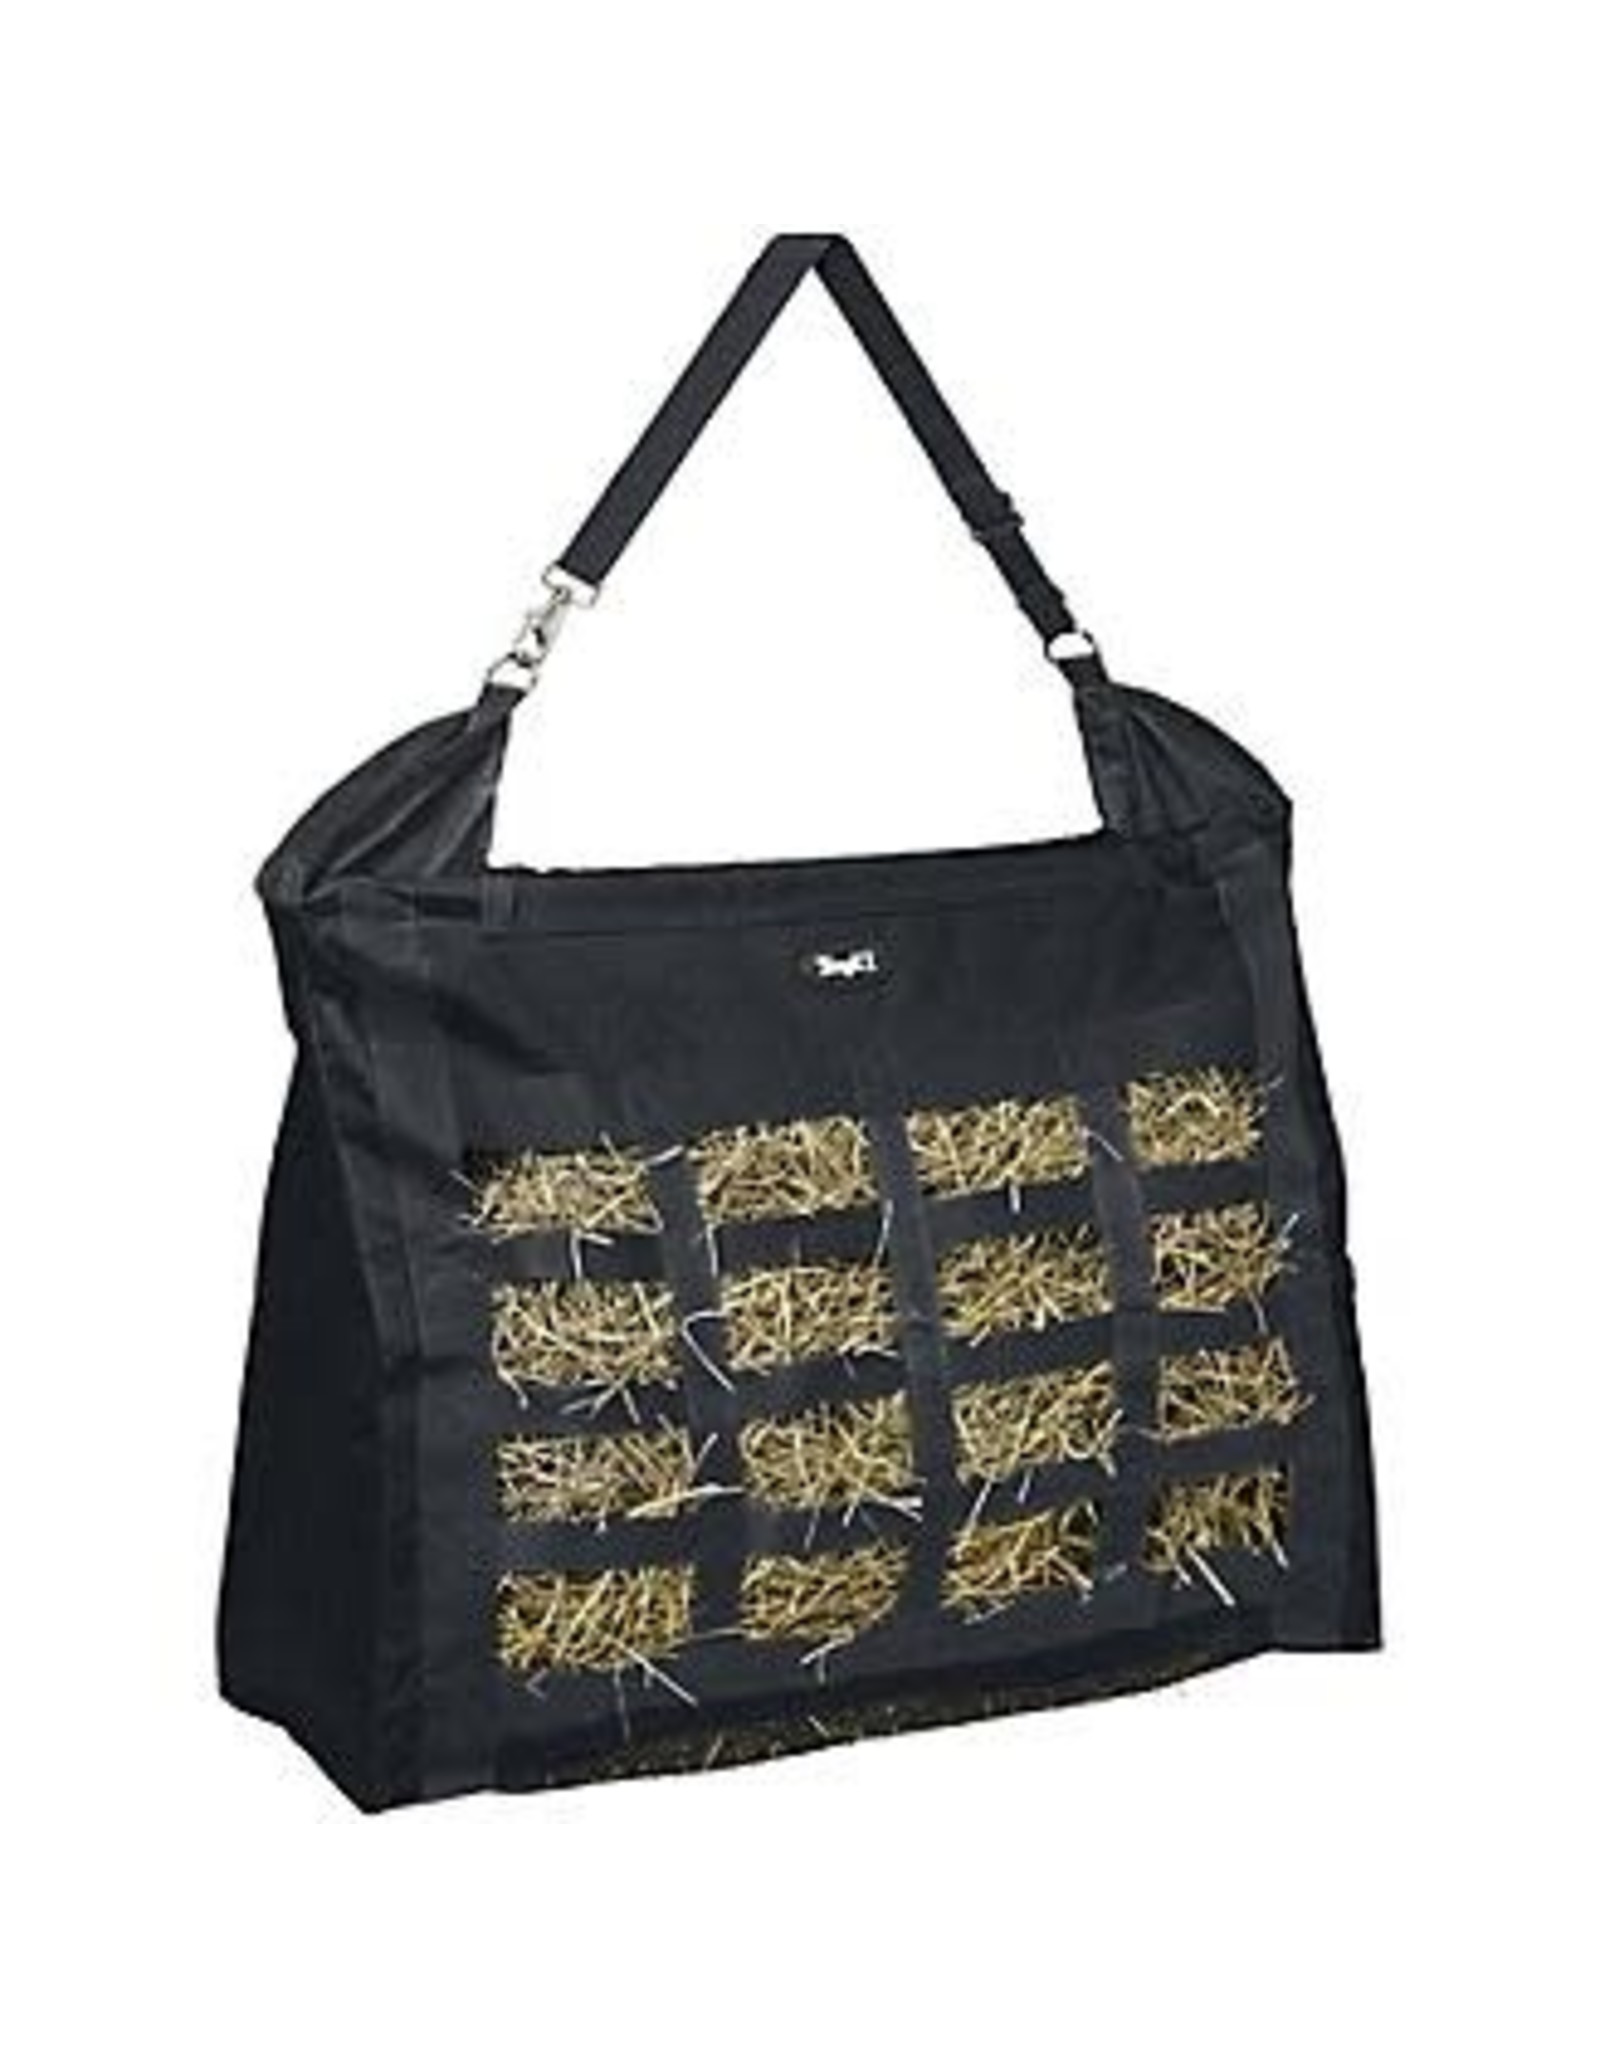 Nelson Royal's Hay Bag w/ Dividers Blk 72-1835-2-0